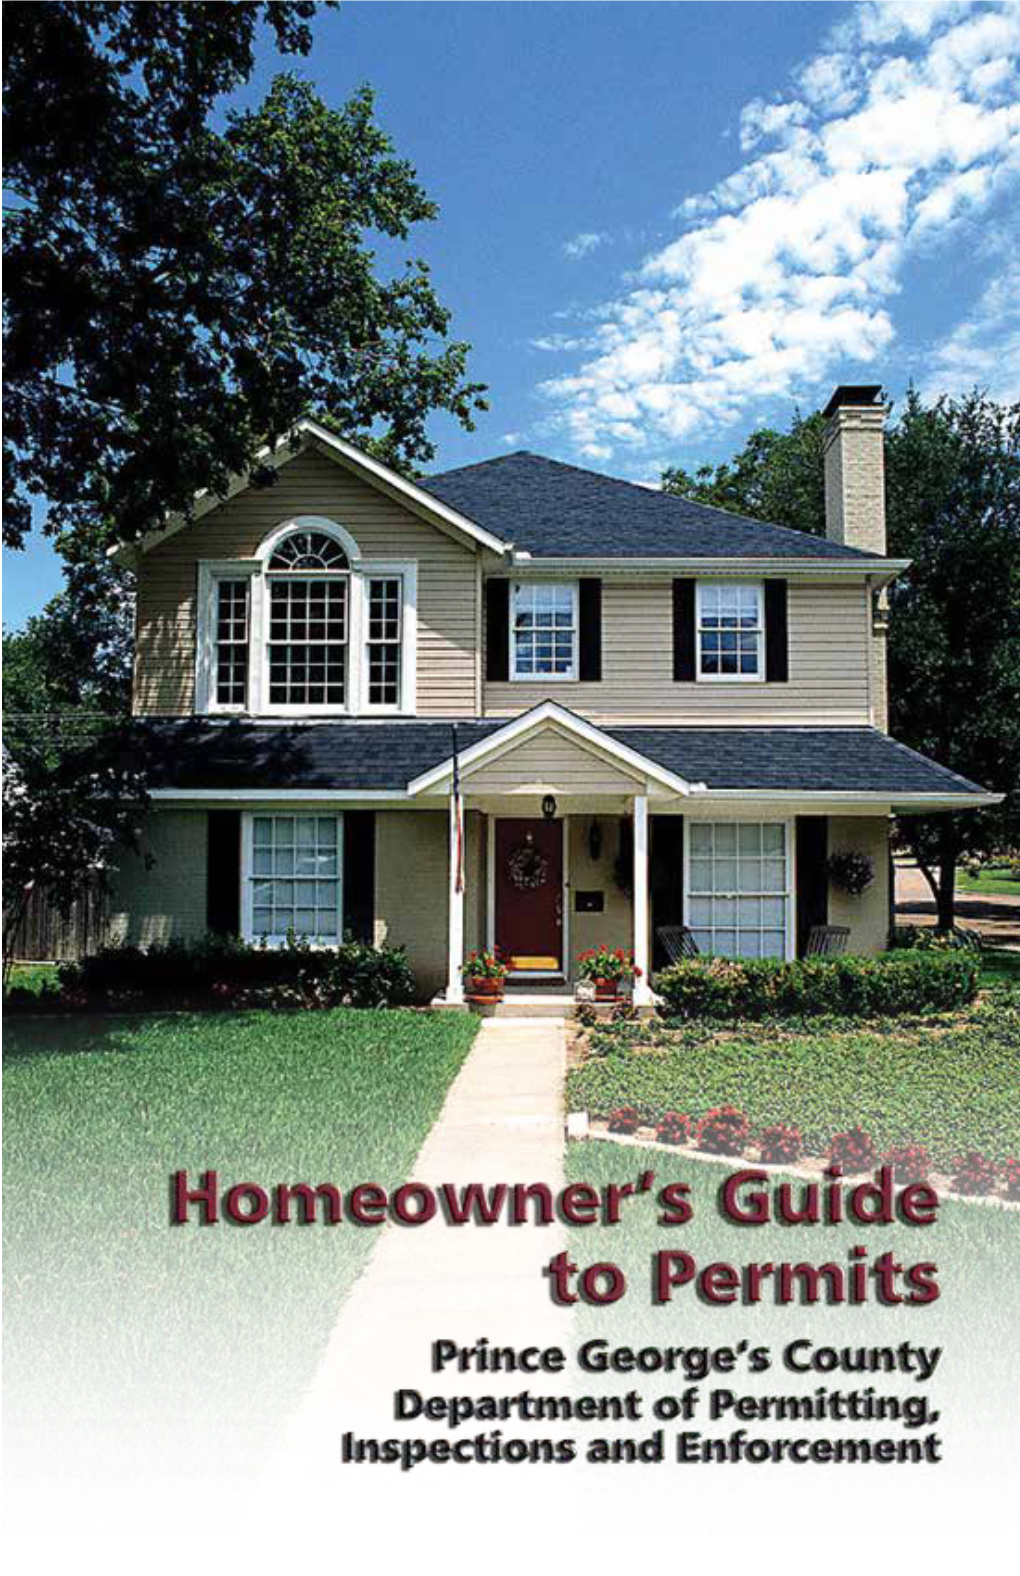 Homeowner's Guide to Permits (PDF)